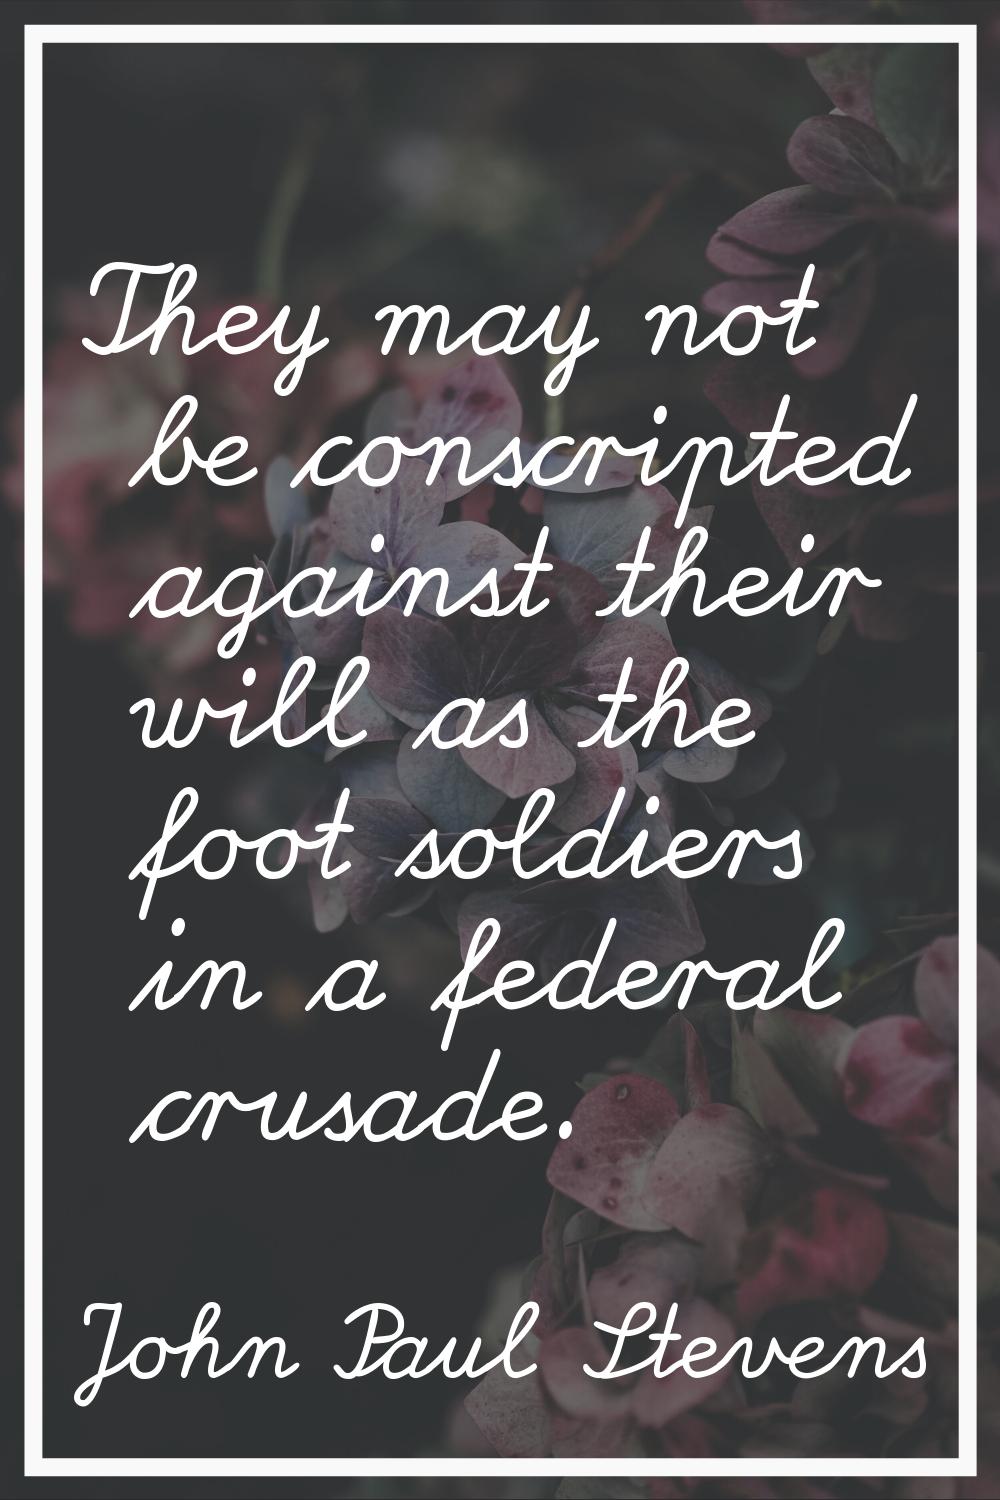 They may not be conscripted against their will as the foot soldiers in a federal crusade.